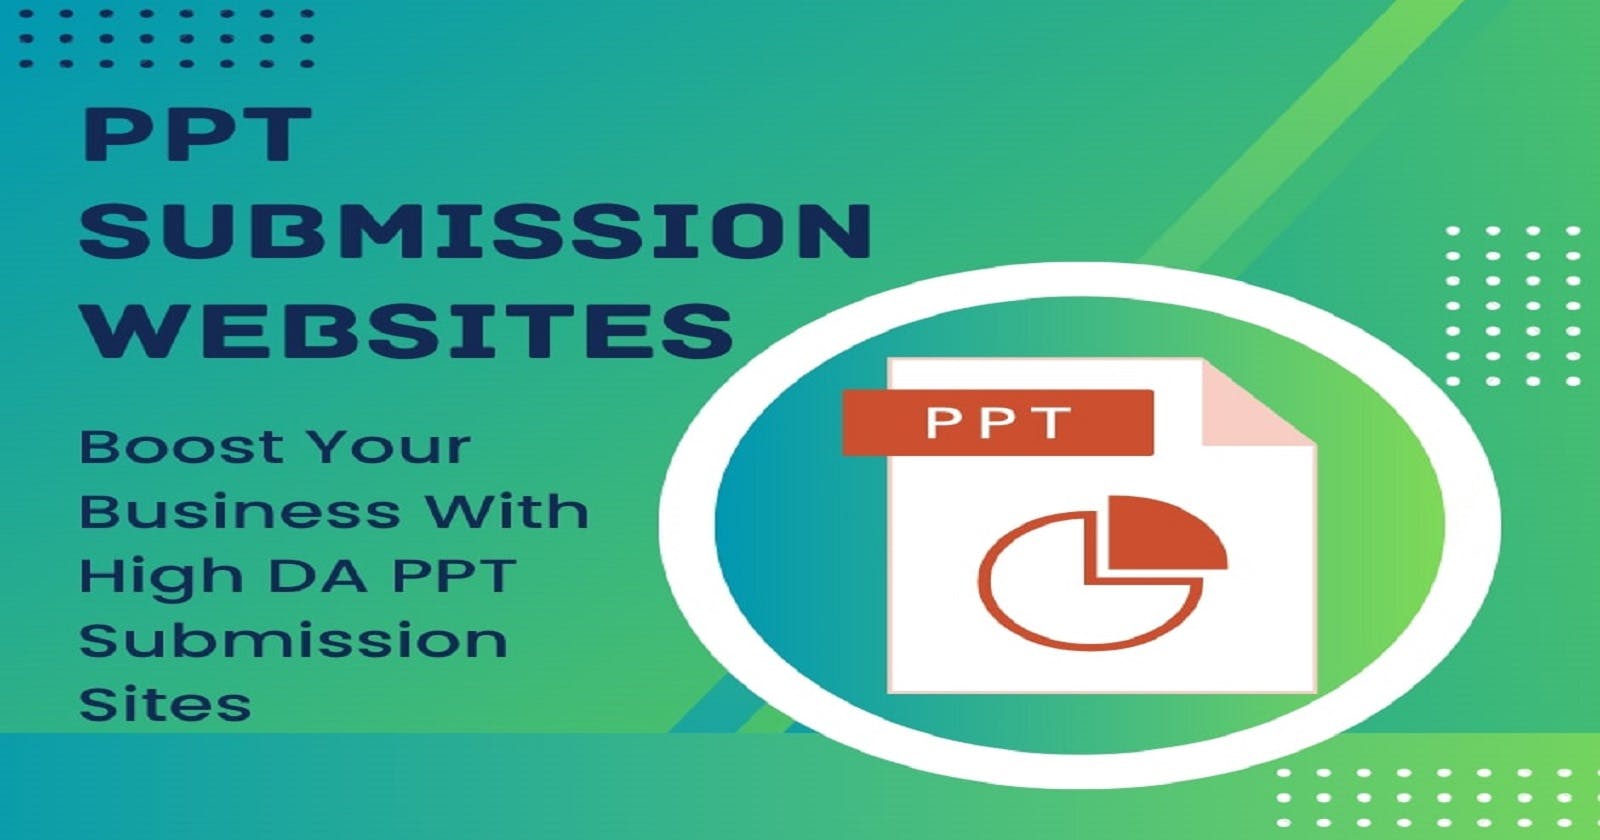 What Are PPT Submission Sites?